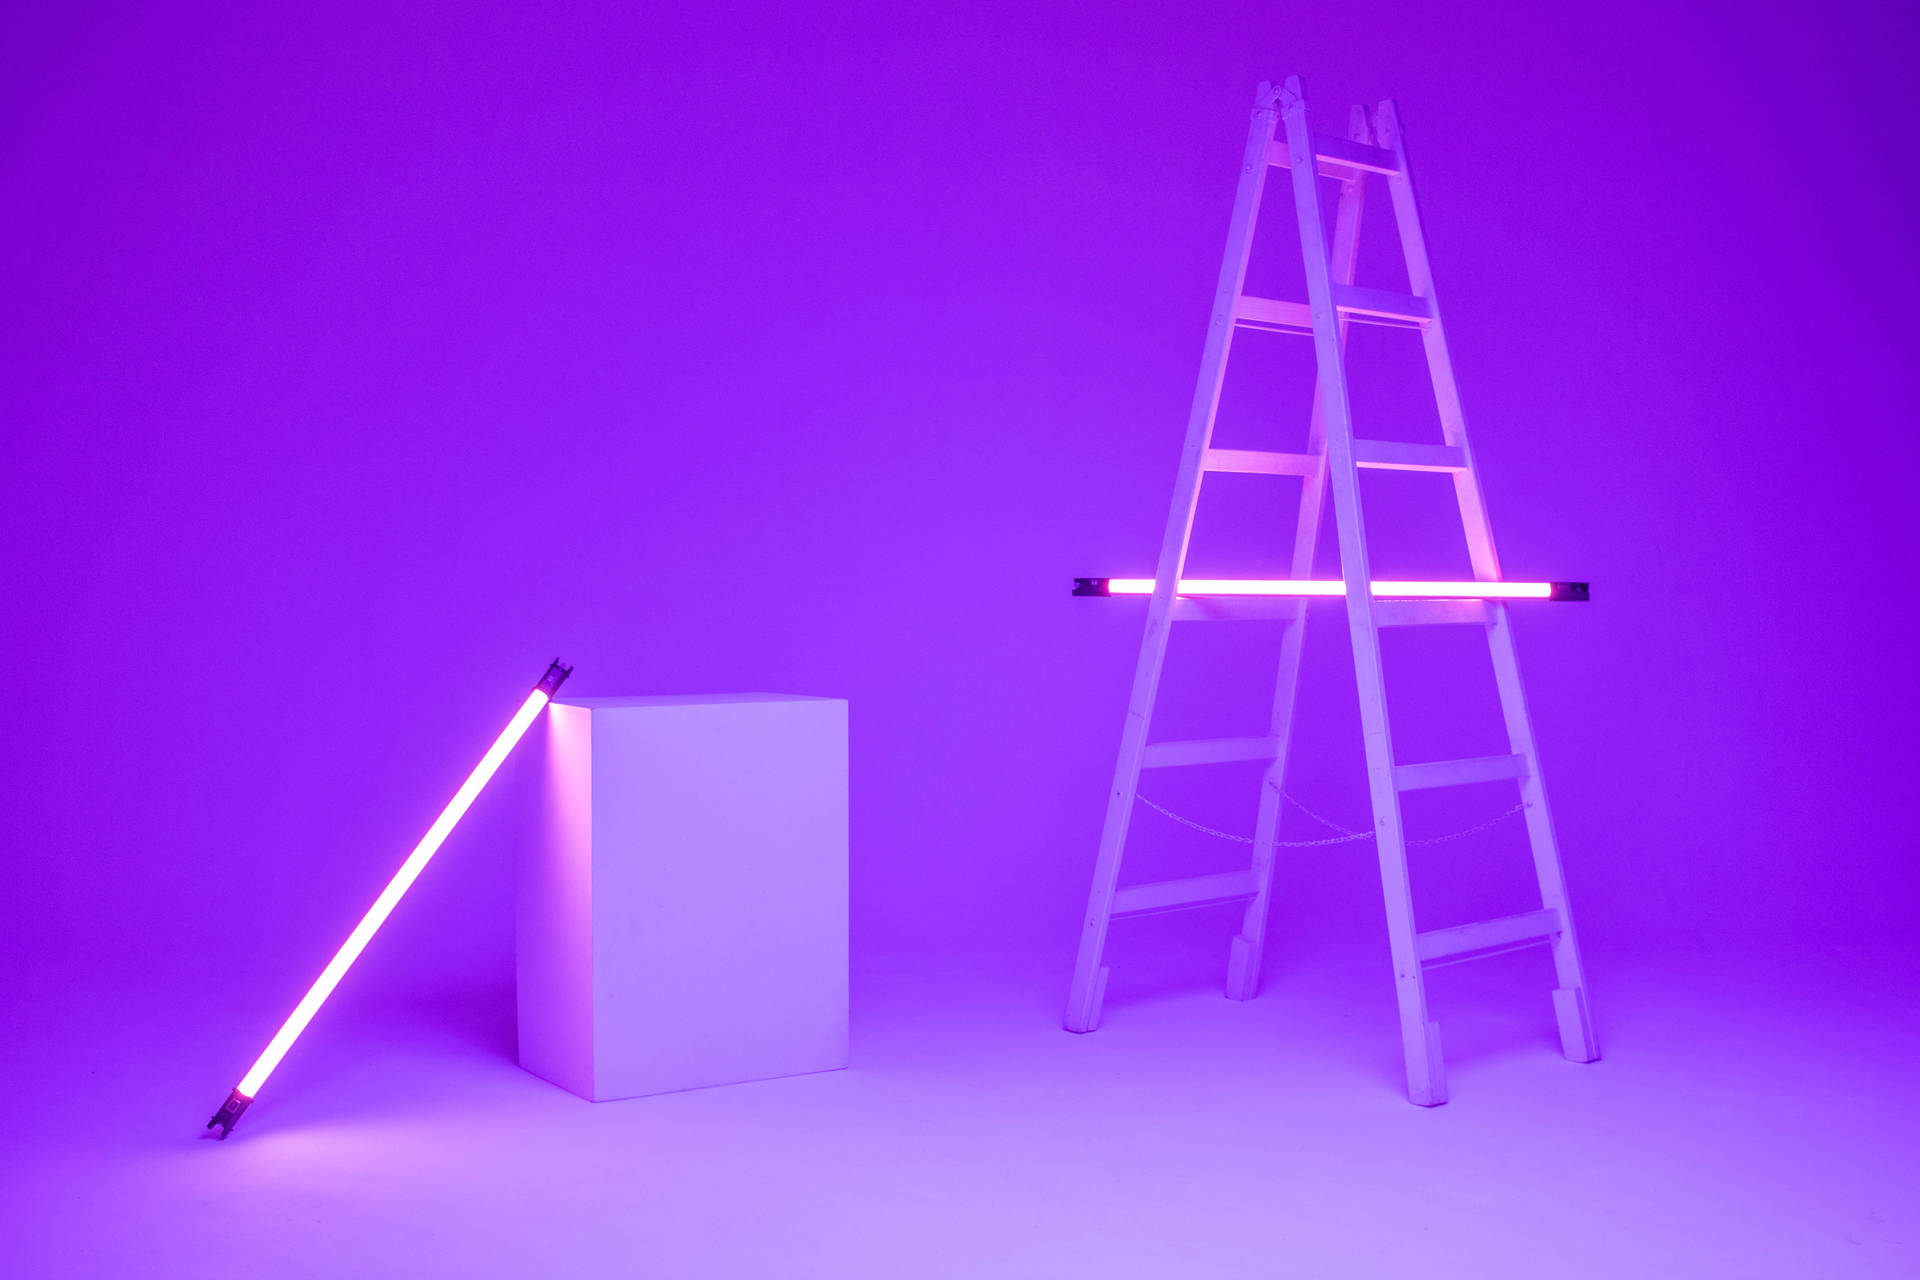 A Ladder With A Purple Light And A Ladder With A Purple Light Wallpaper